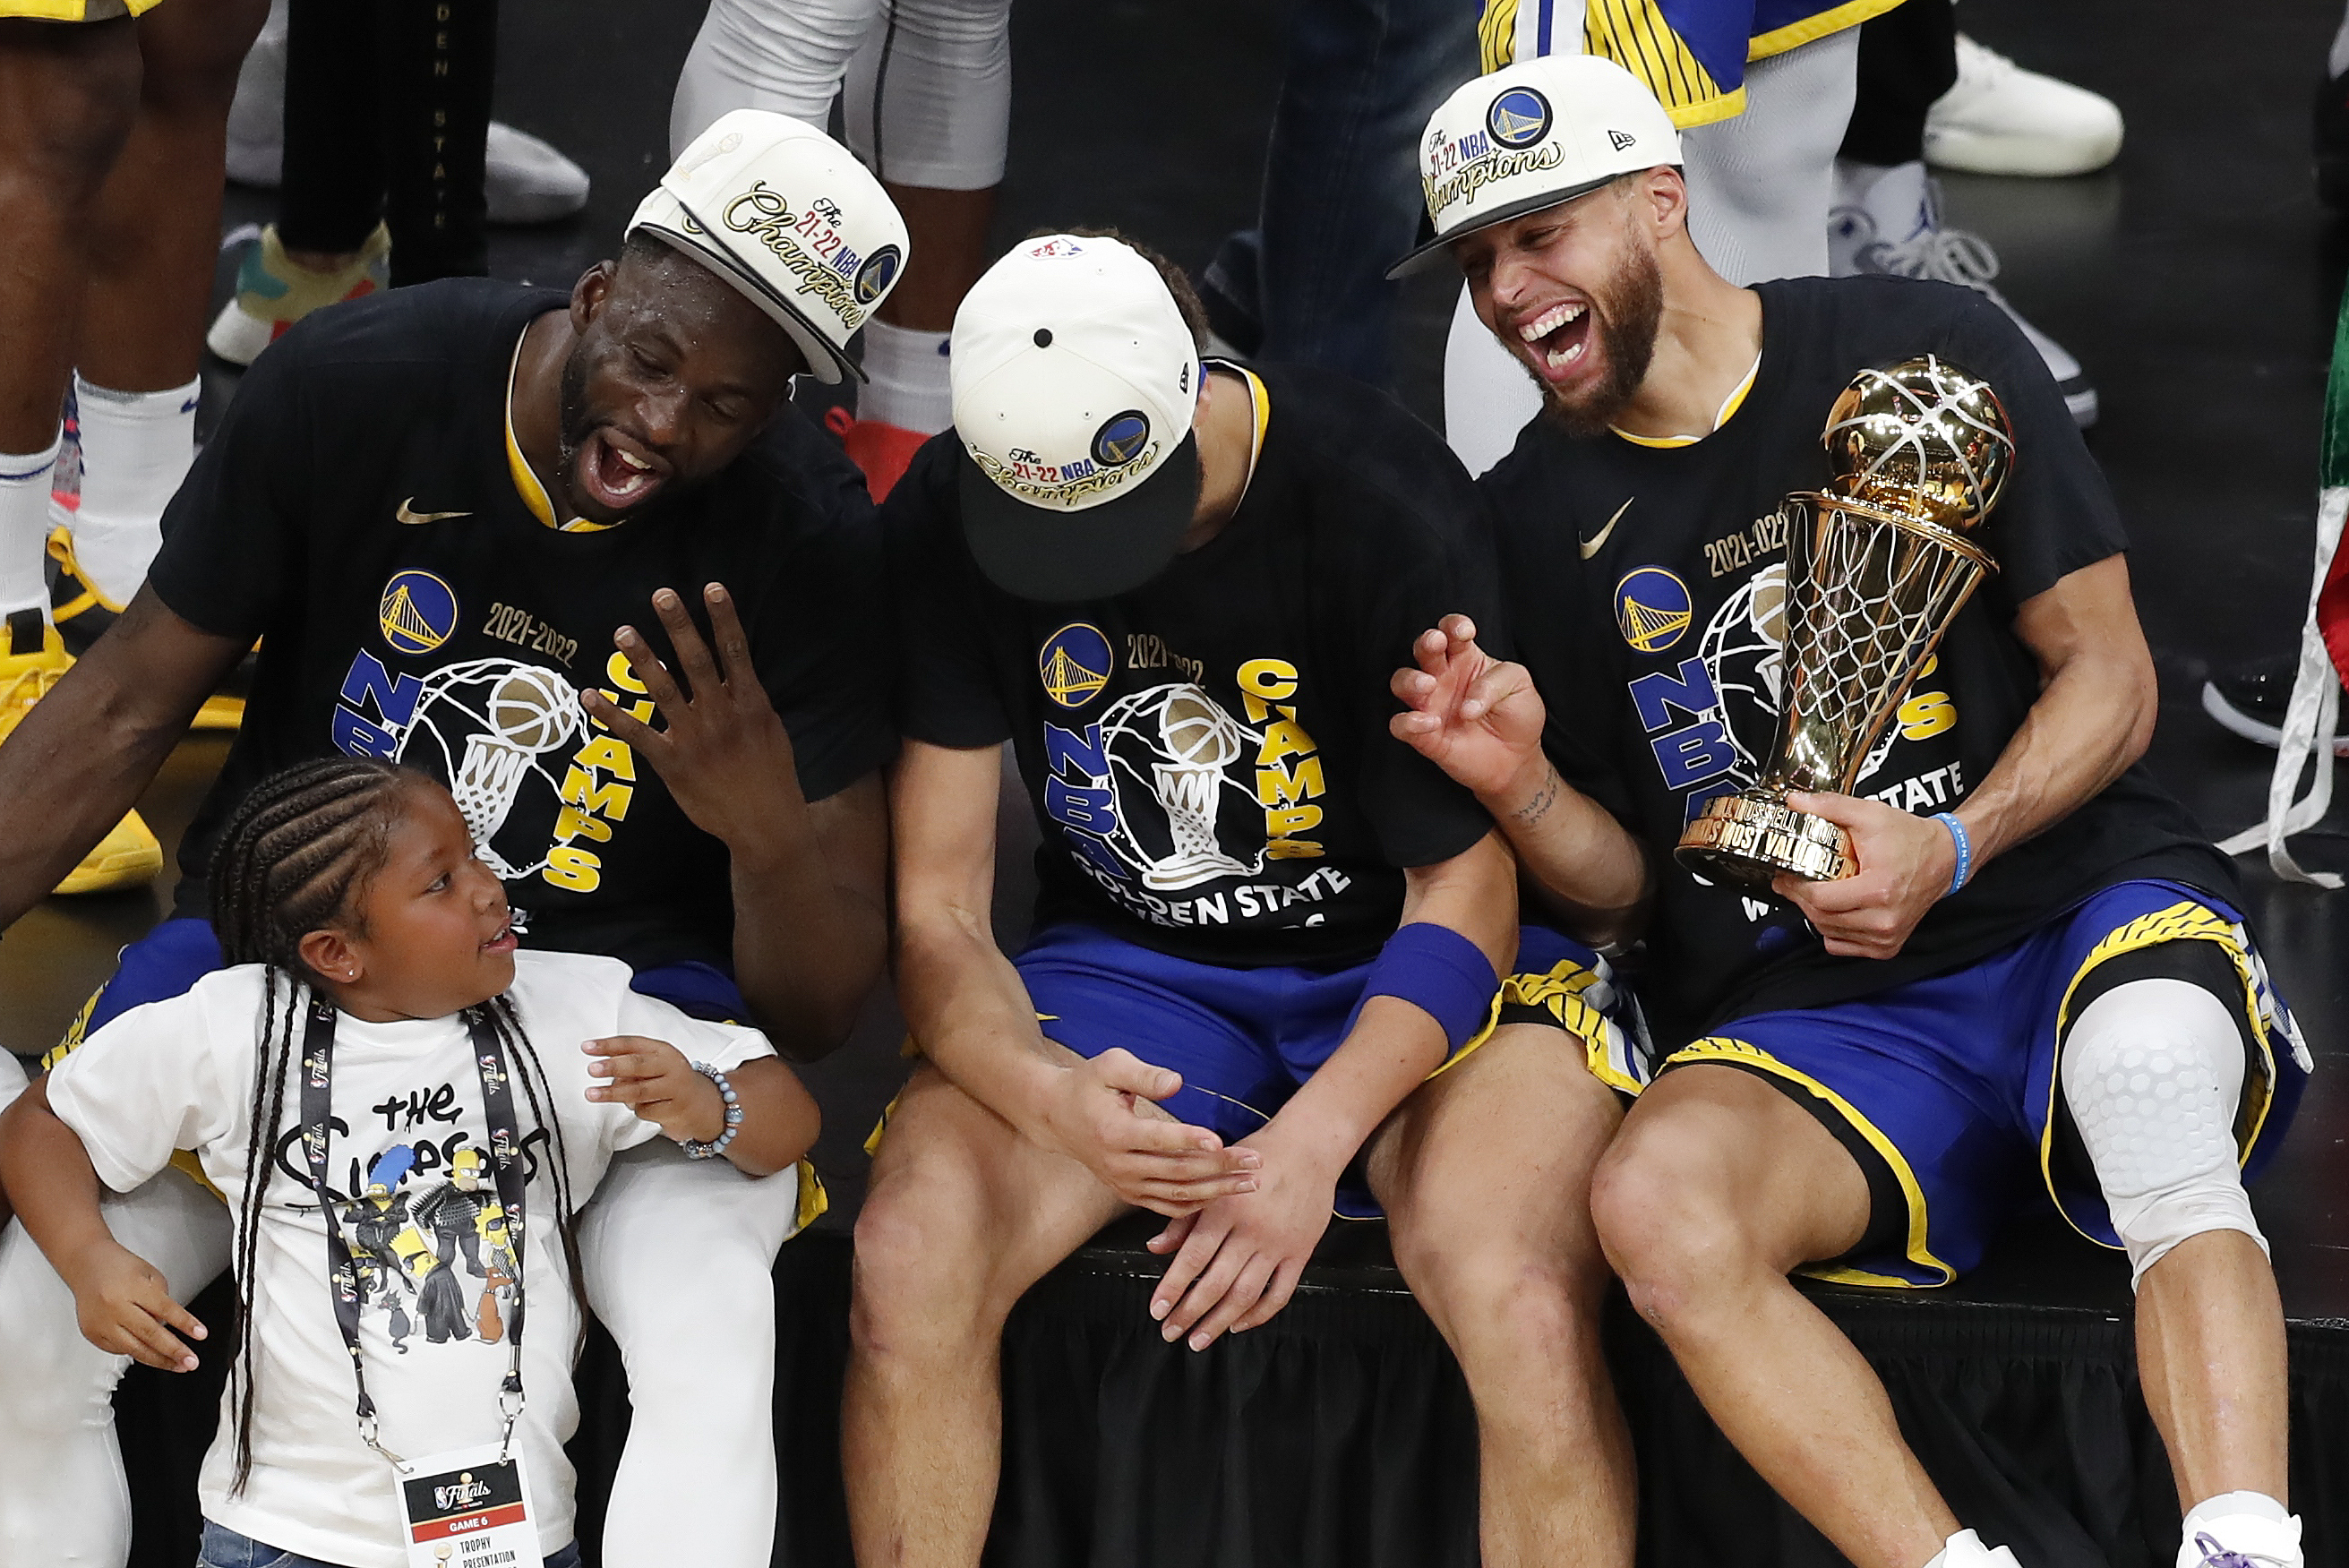 Inside the Warriors' locker room after the championship